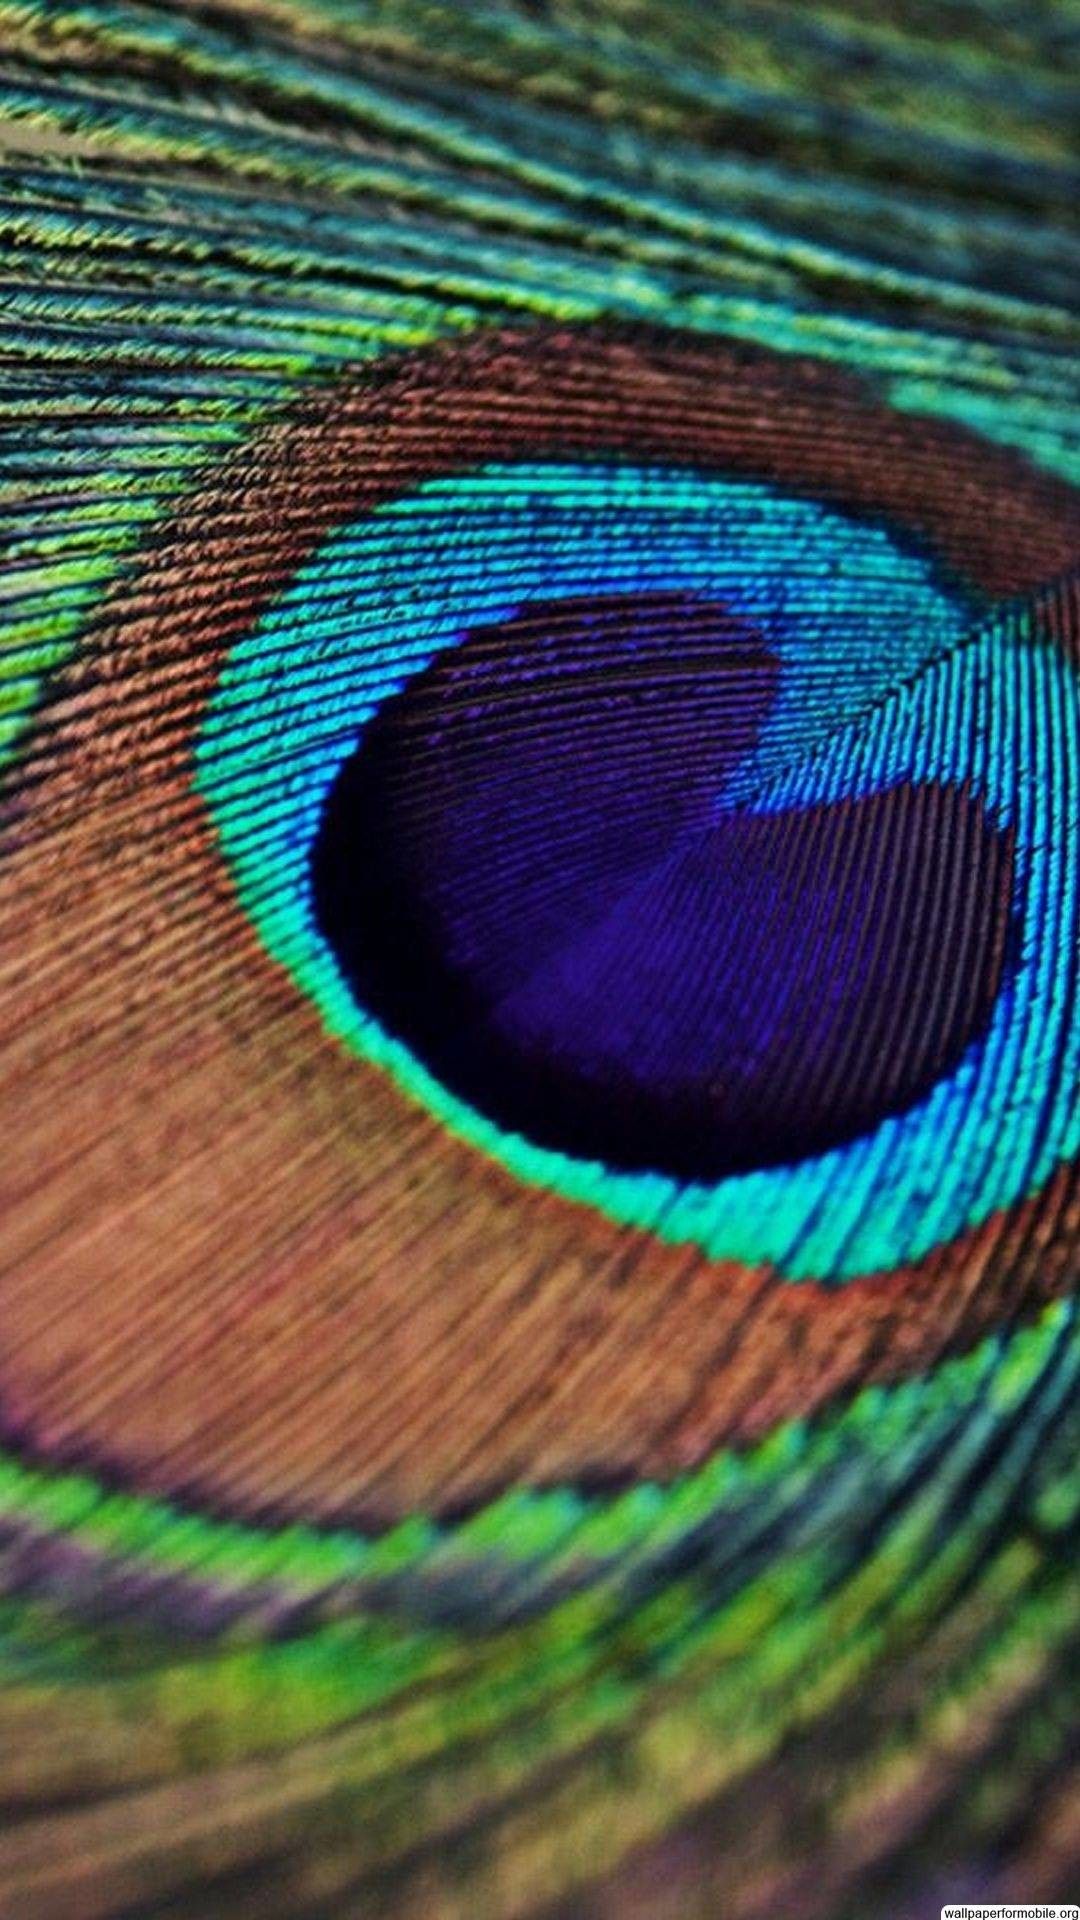 1080x1920 Single Peacock Feather Wallpaper Peacock Feather Wallpaper For Iphone Hd Wallpaper Background Download